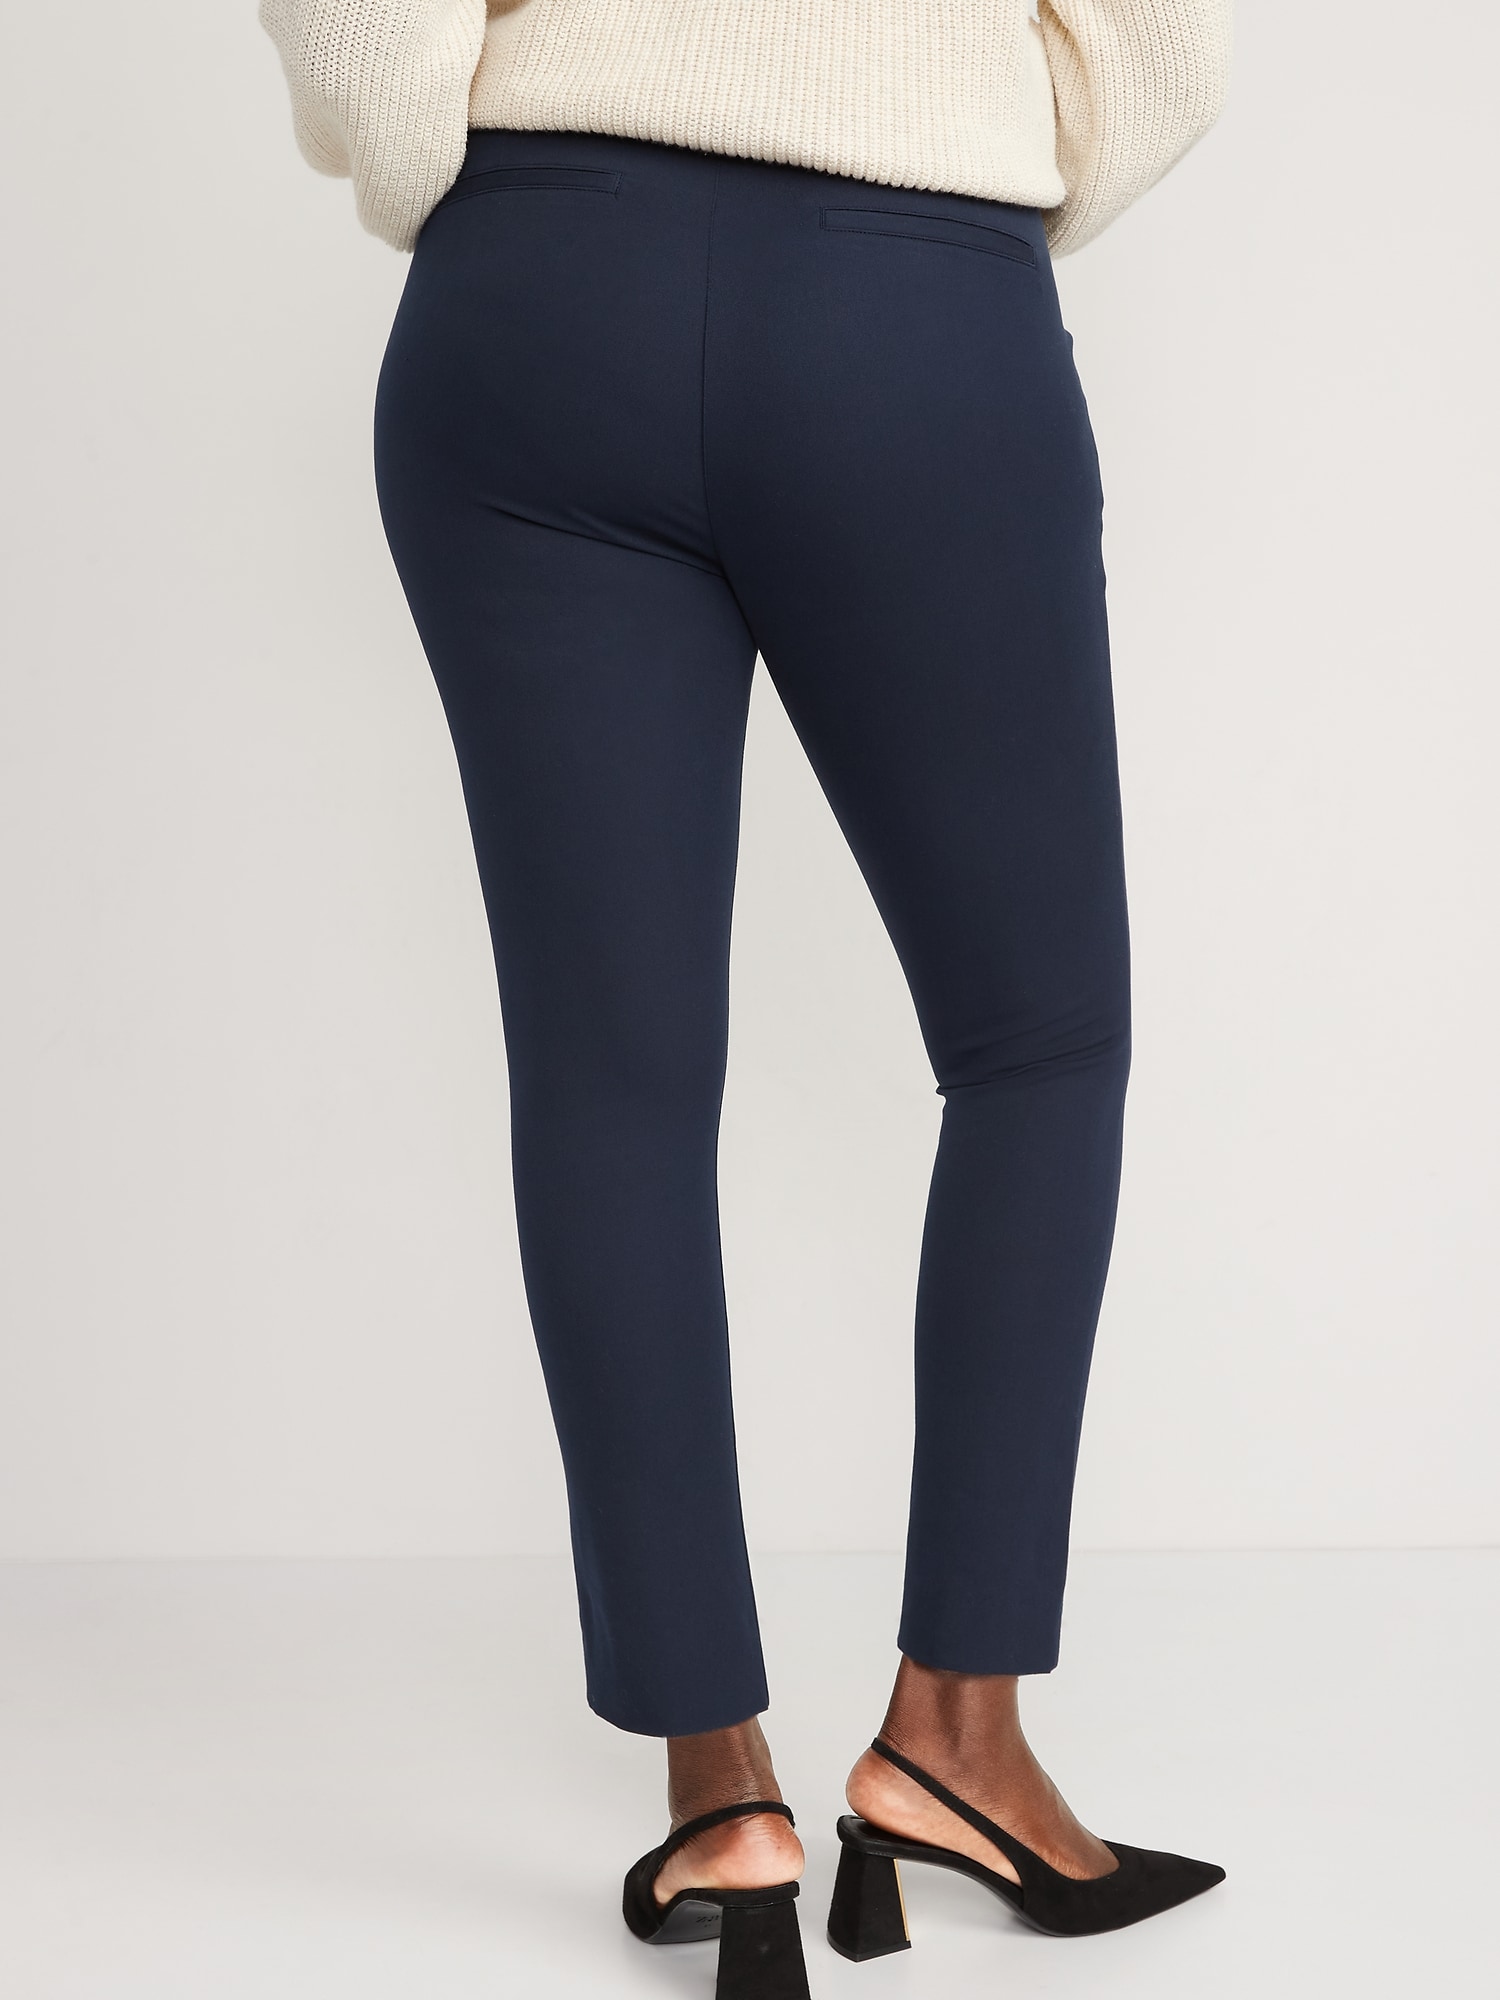 4 Tips for Finding the Best Pants for Curvy Figures | Who What Wear